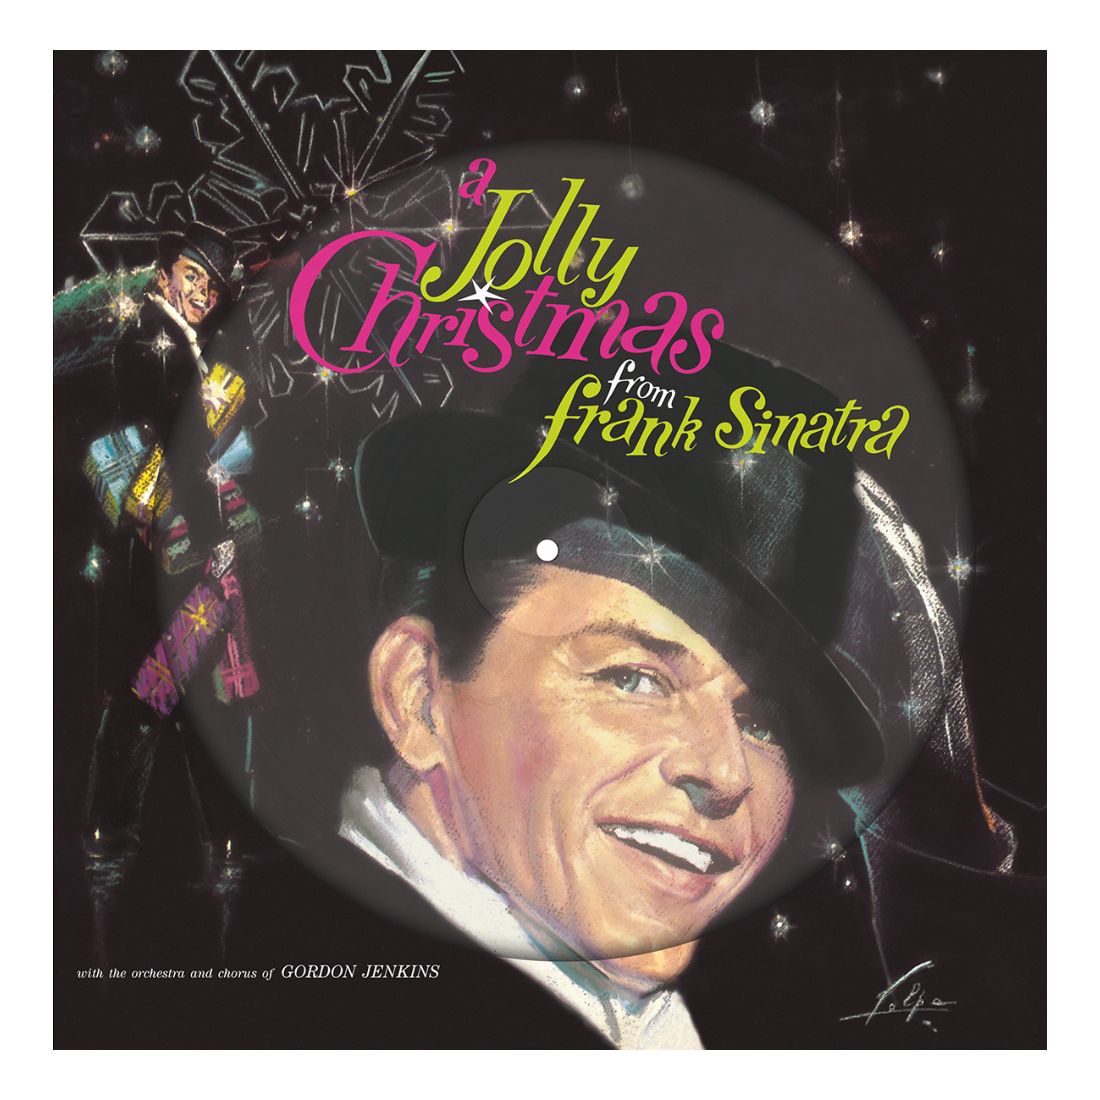 Виниловая пластинка A Jolly Christmas from Frank Sinatra (Picture Disc) | Frank Sinatra виниловая пластинка sinatra frank vinylart frank sinatra picture